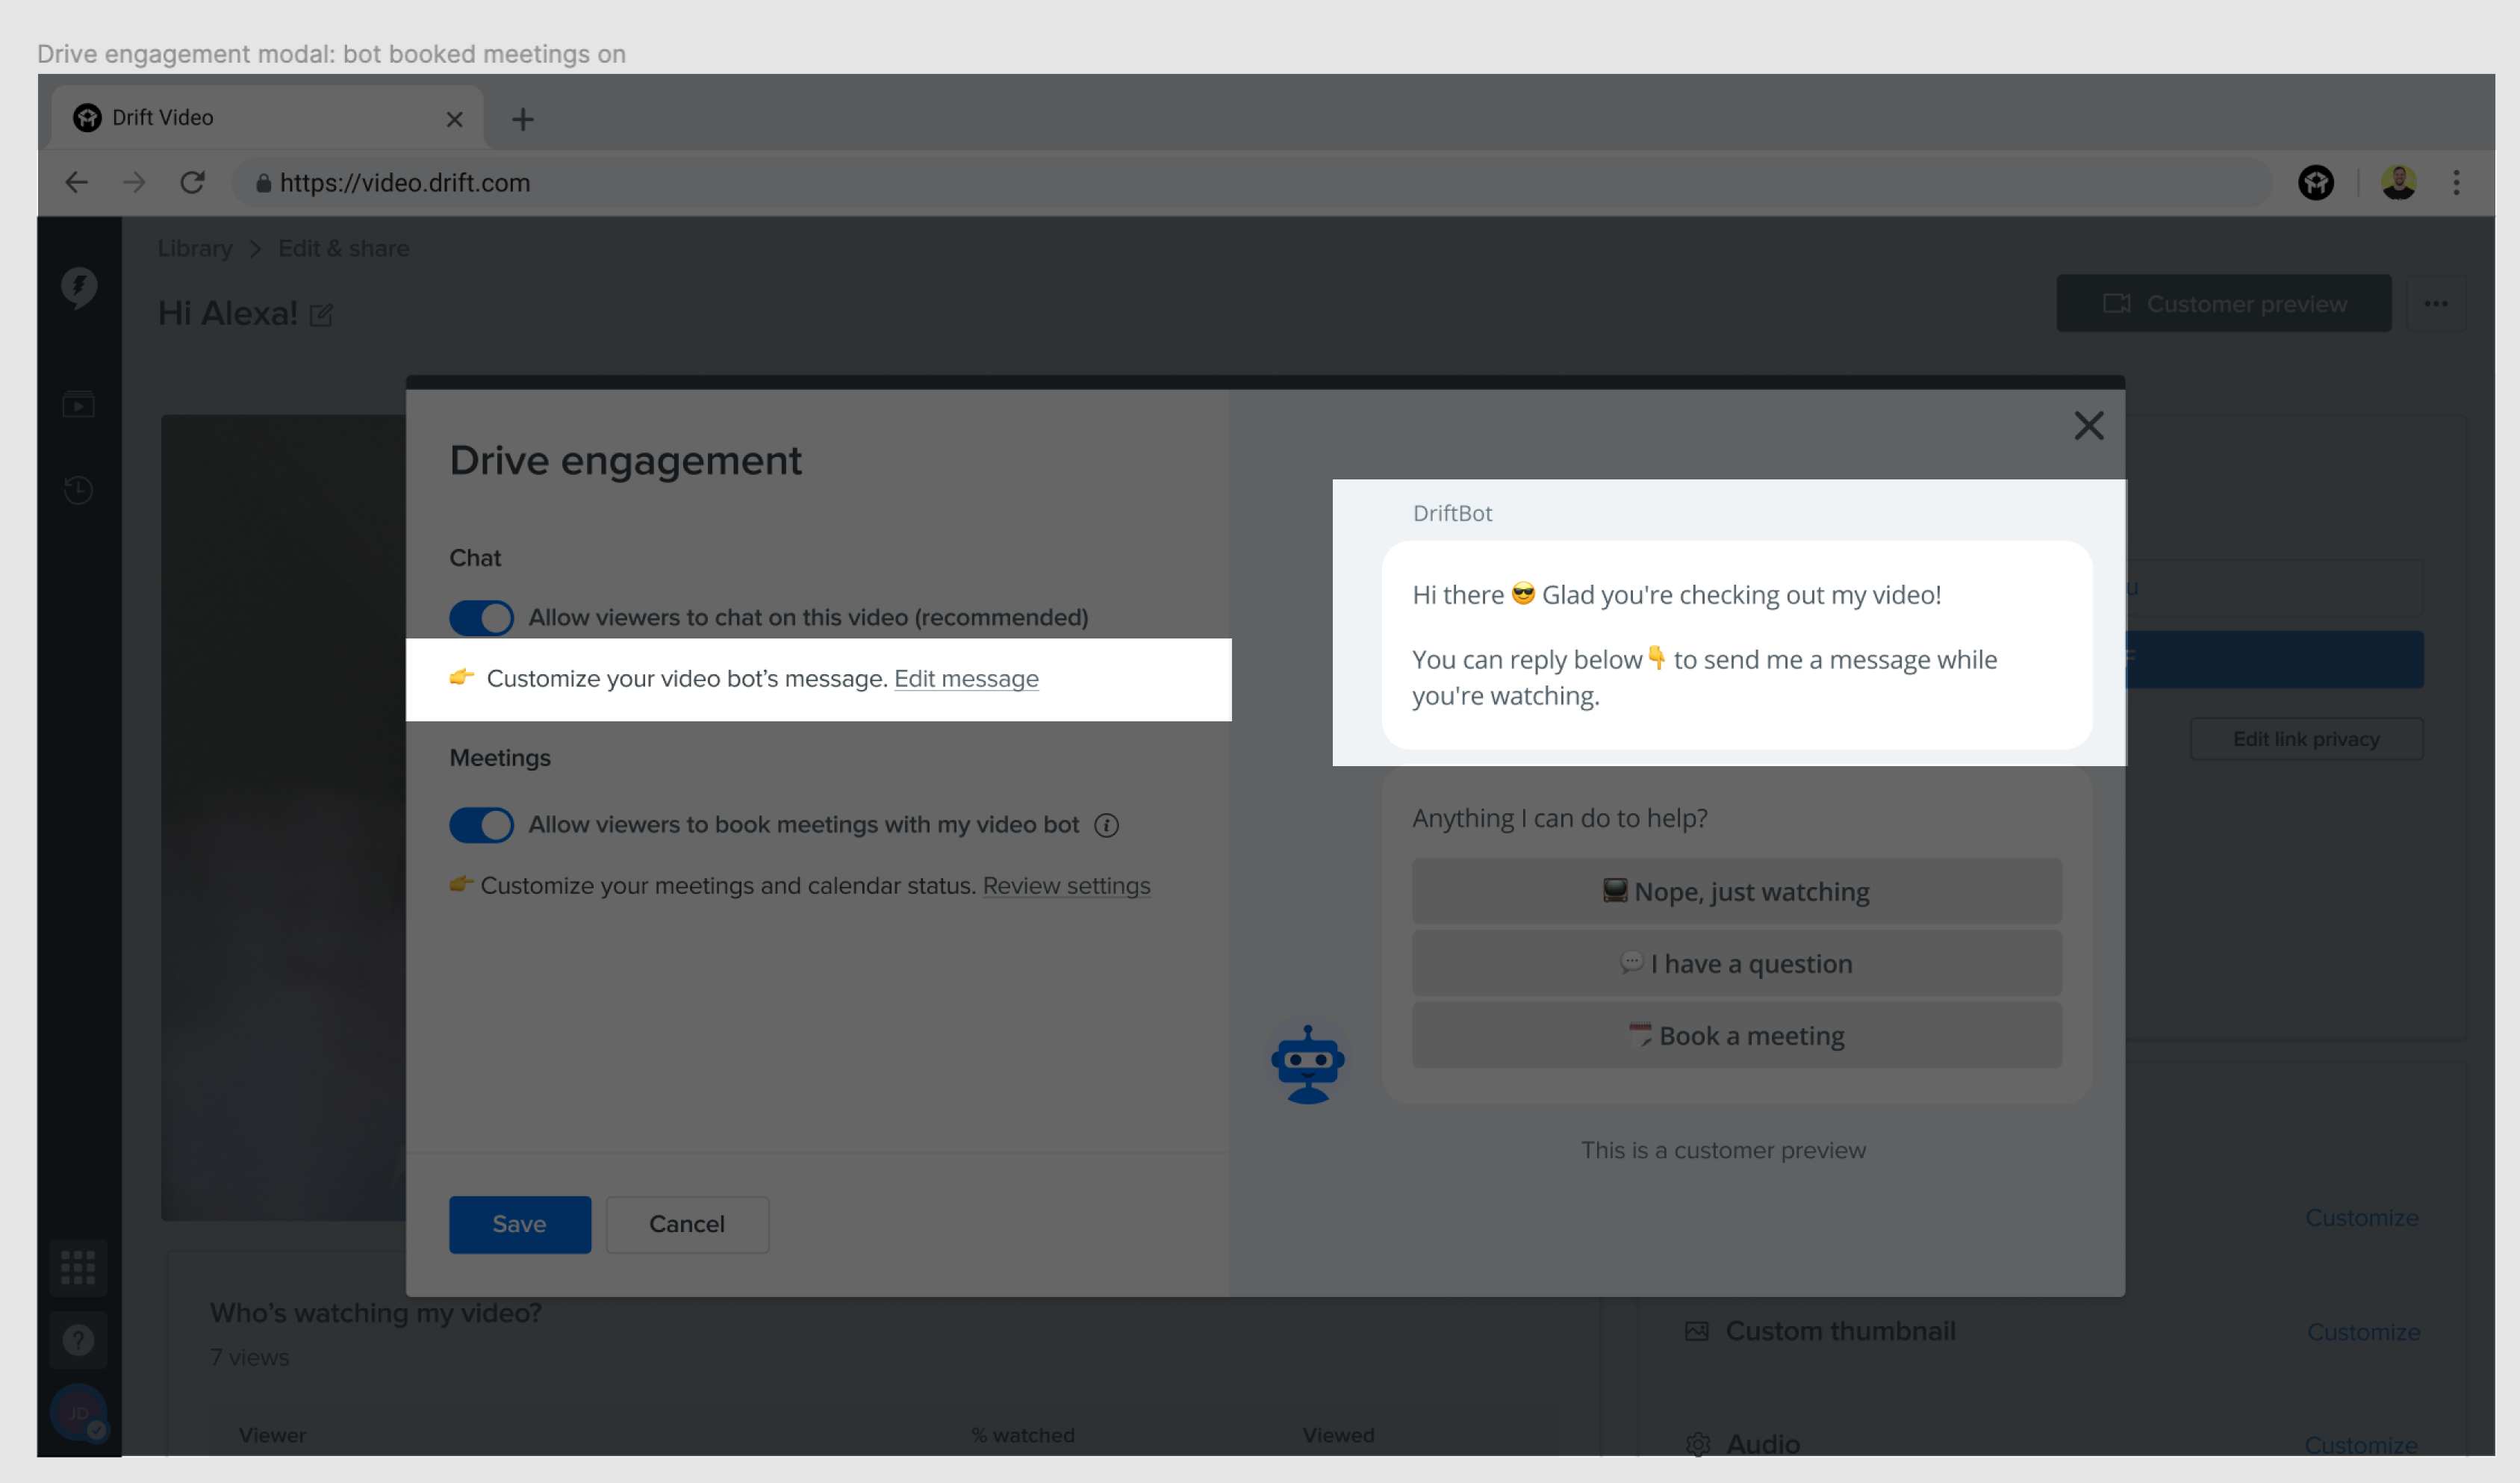 Drive engagement modal with link to edit bot message